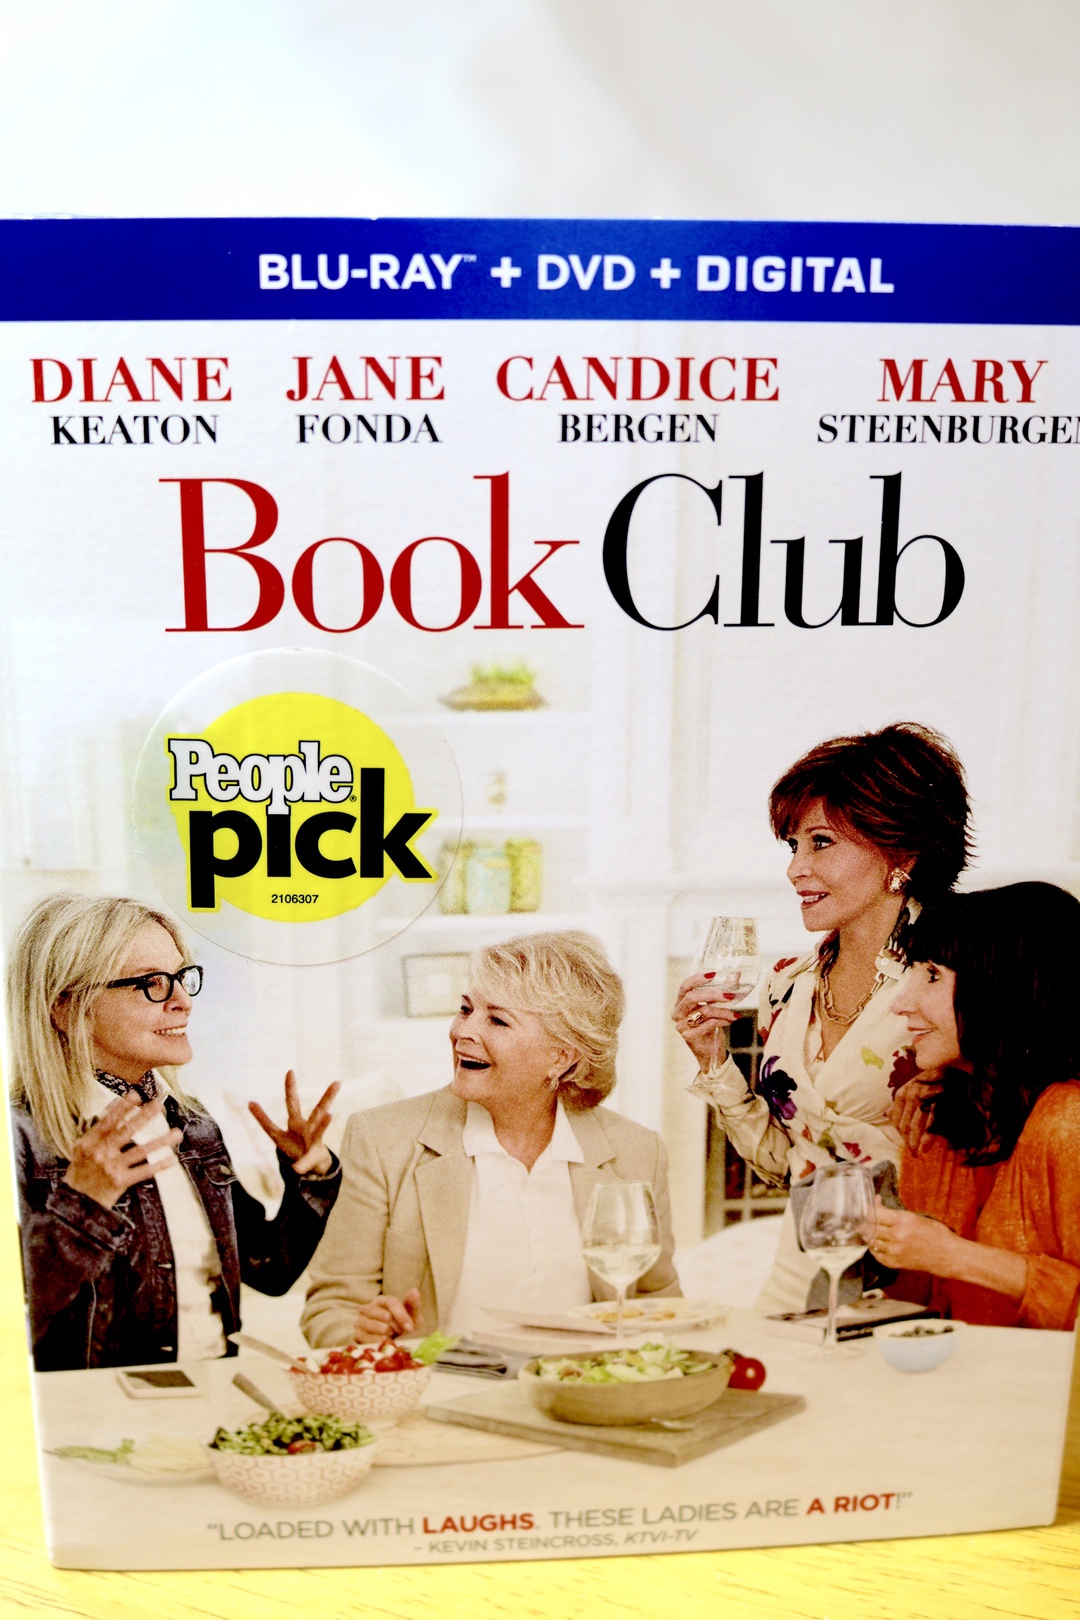 Book Club #BookClub #movie #ParamountPictures #giveaway #ad